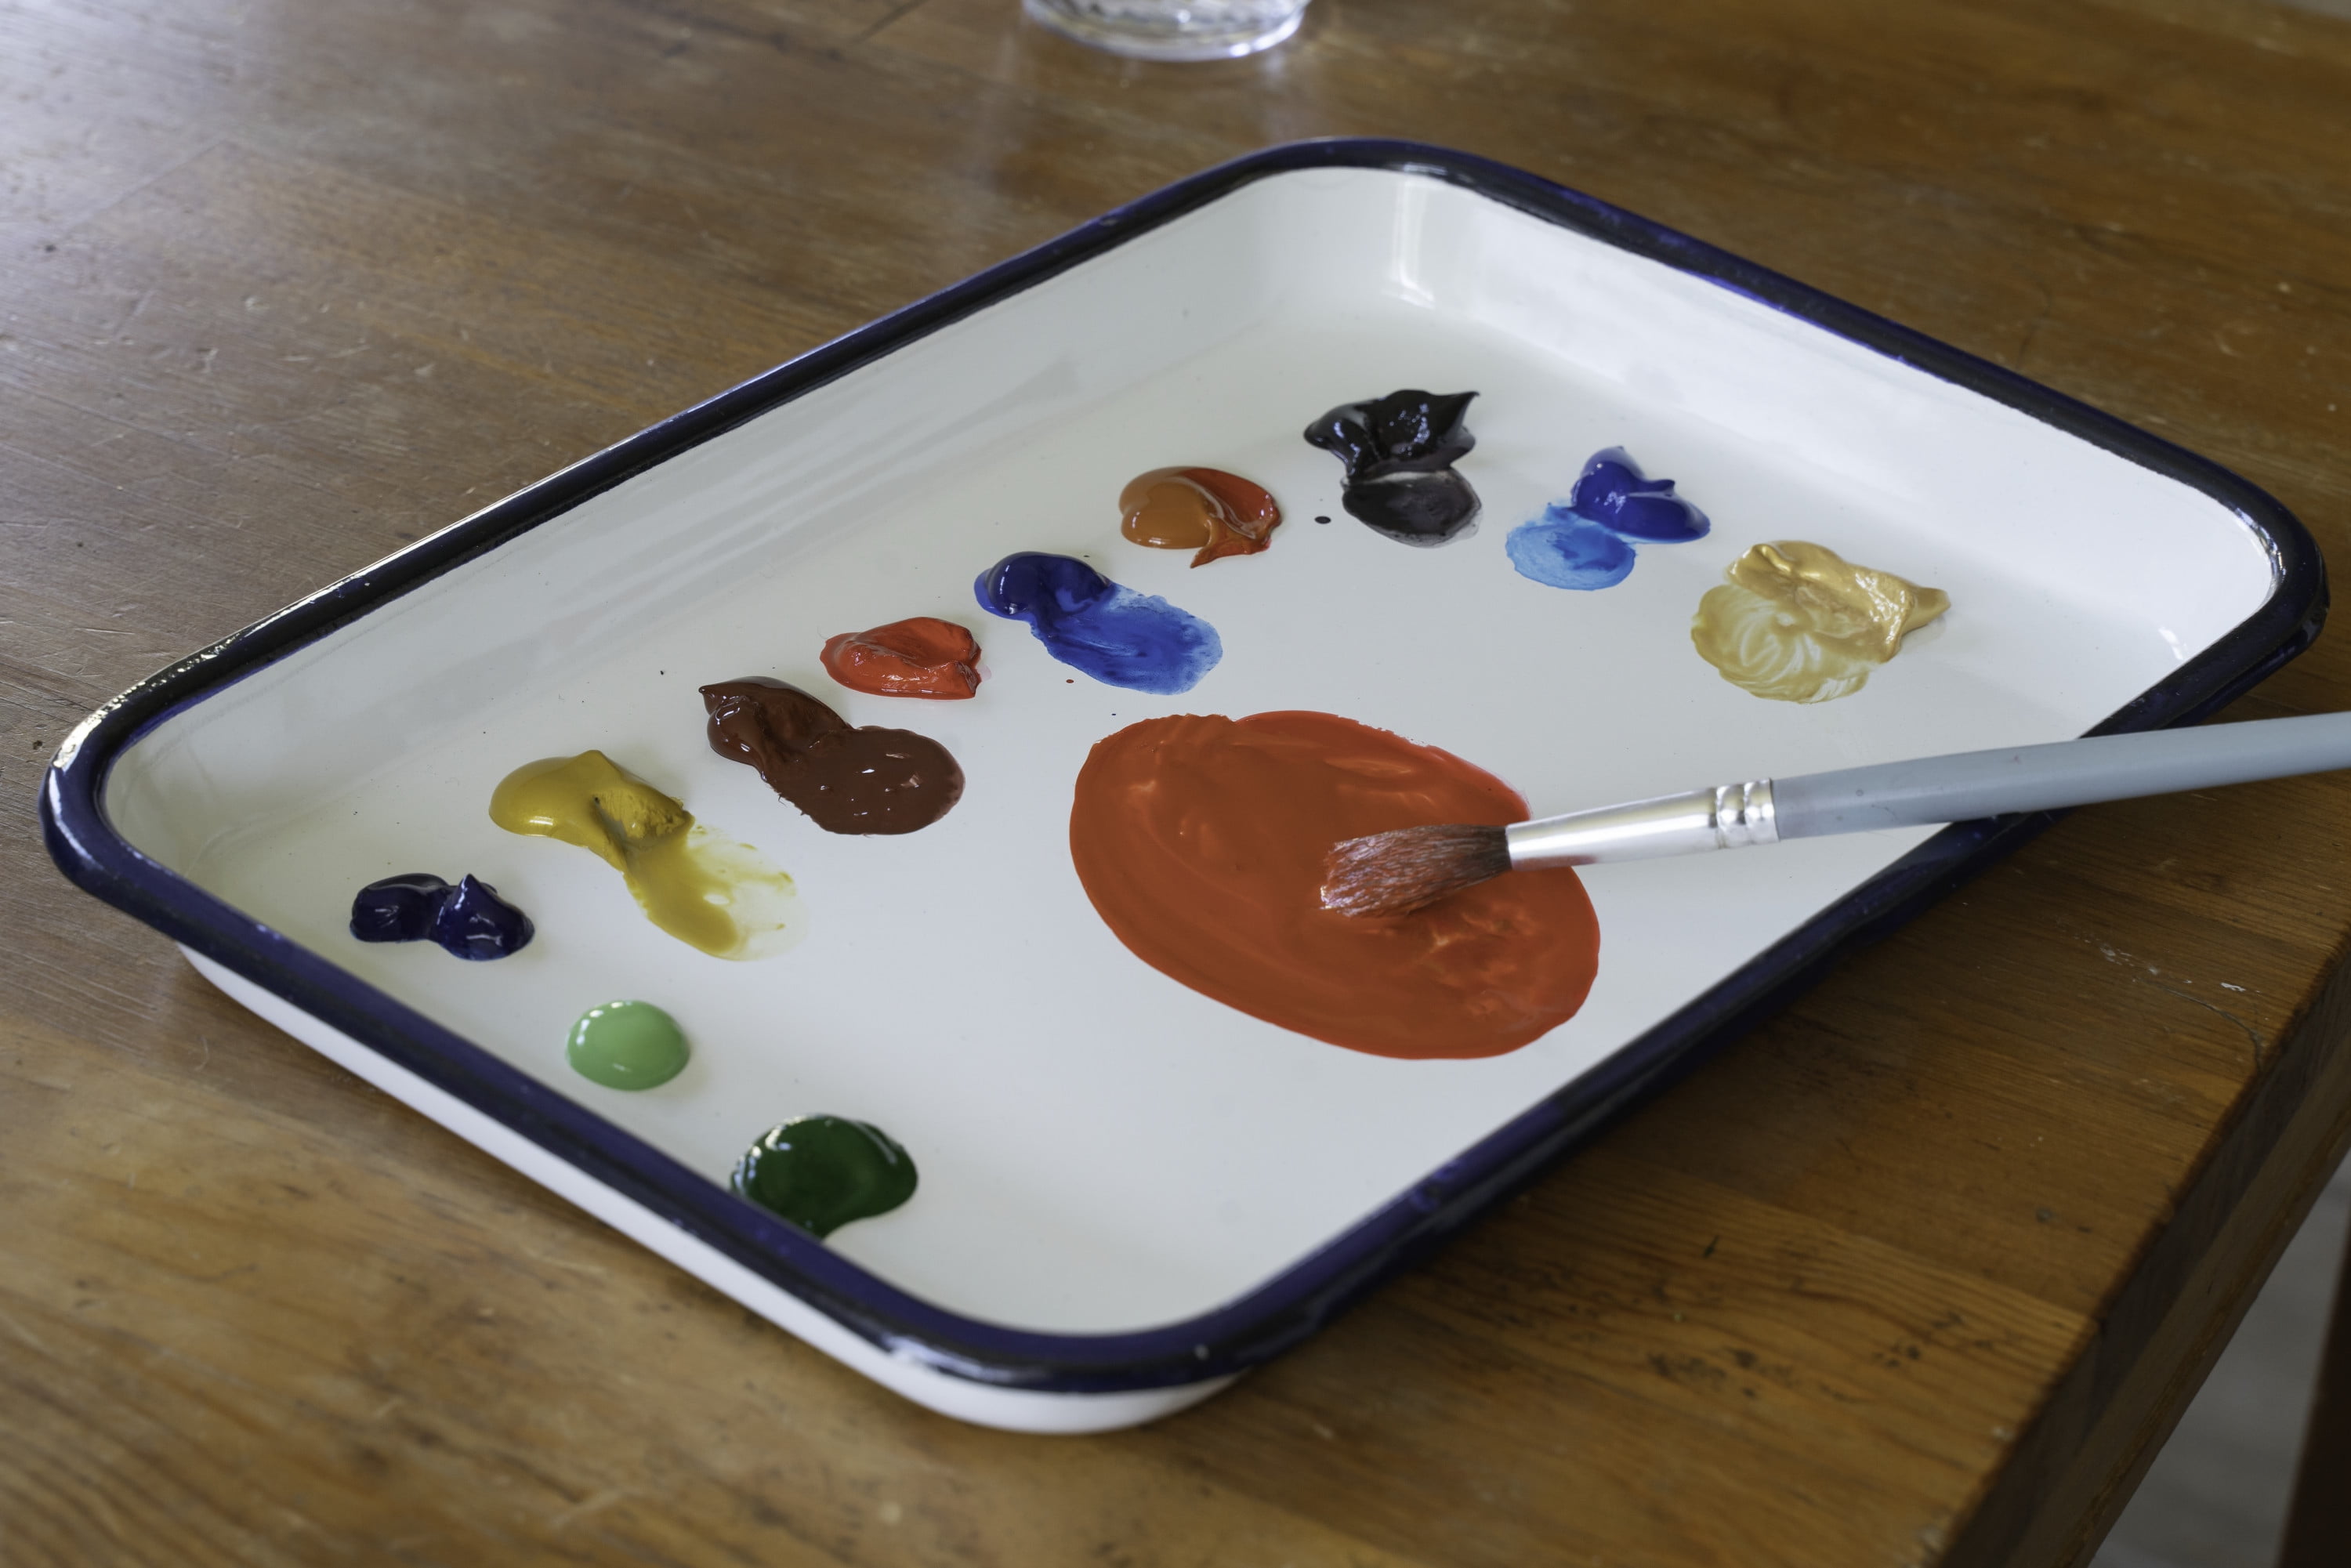 Enamel Butcher Tray 7X10.5 - Perfect as a paint palette or any other crafty  use!